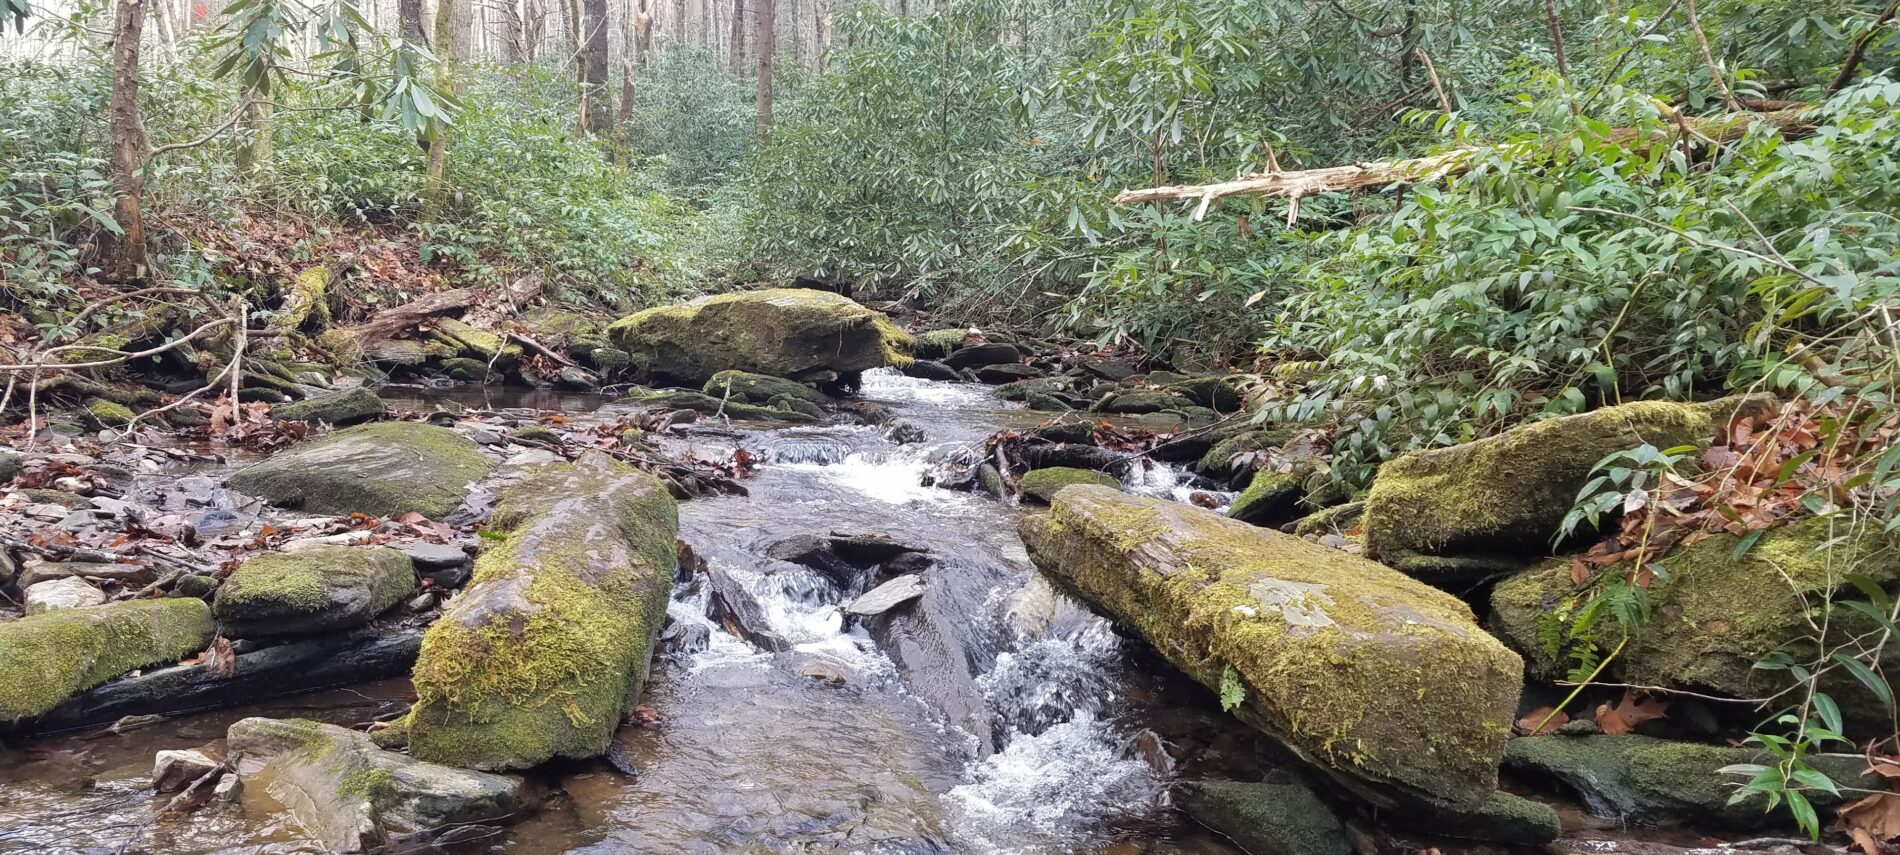 A forest creek with several large rocks in the creek's foreground and a stand of trees in the background